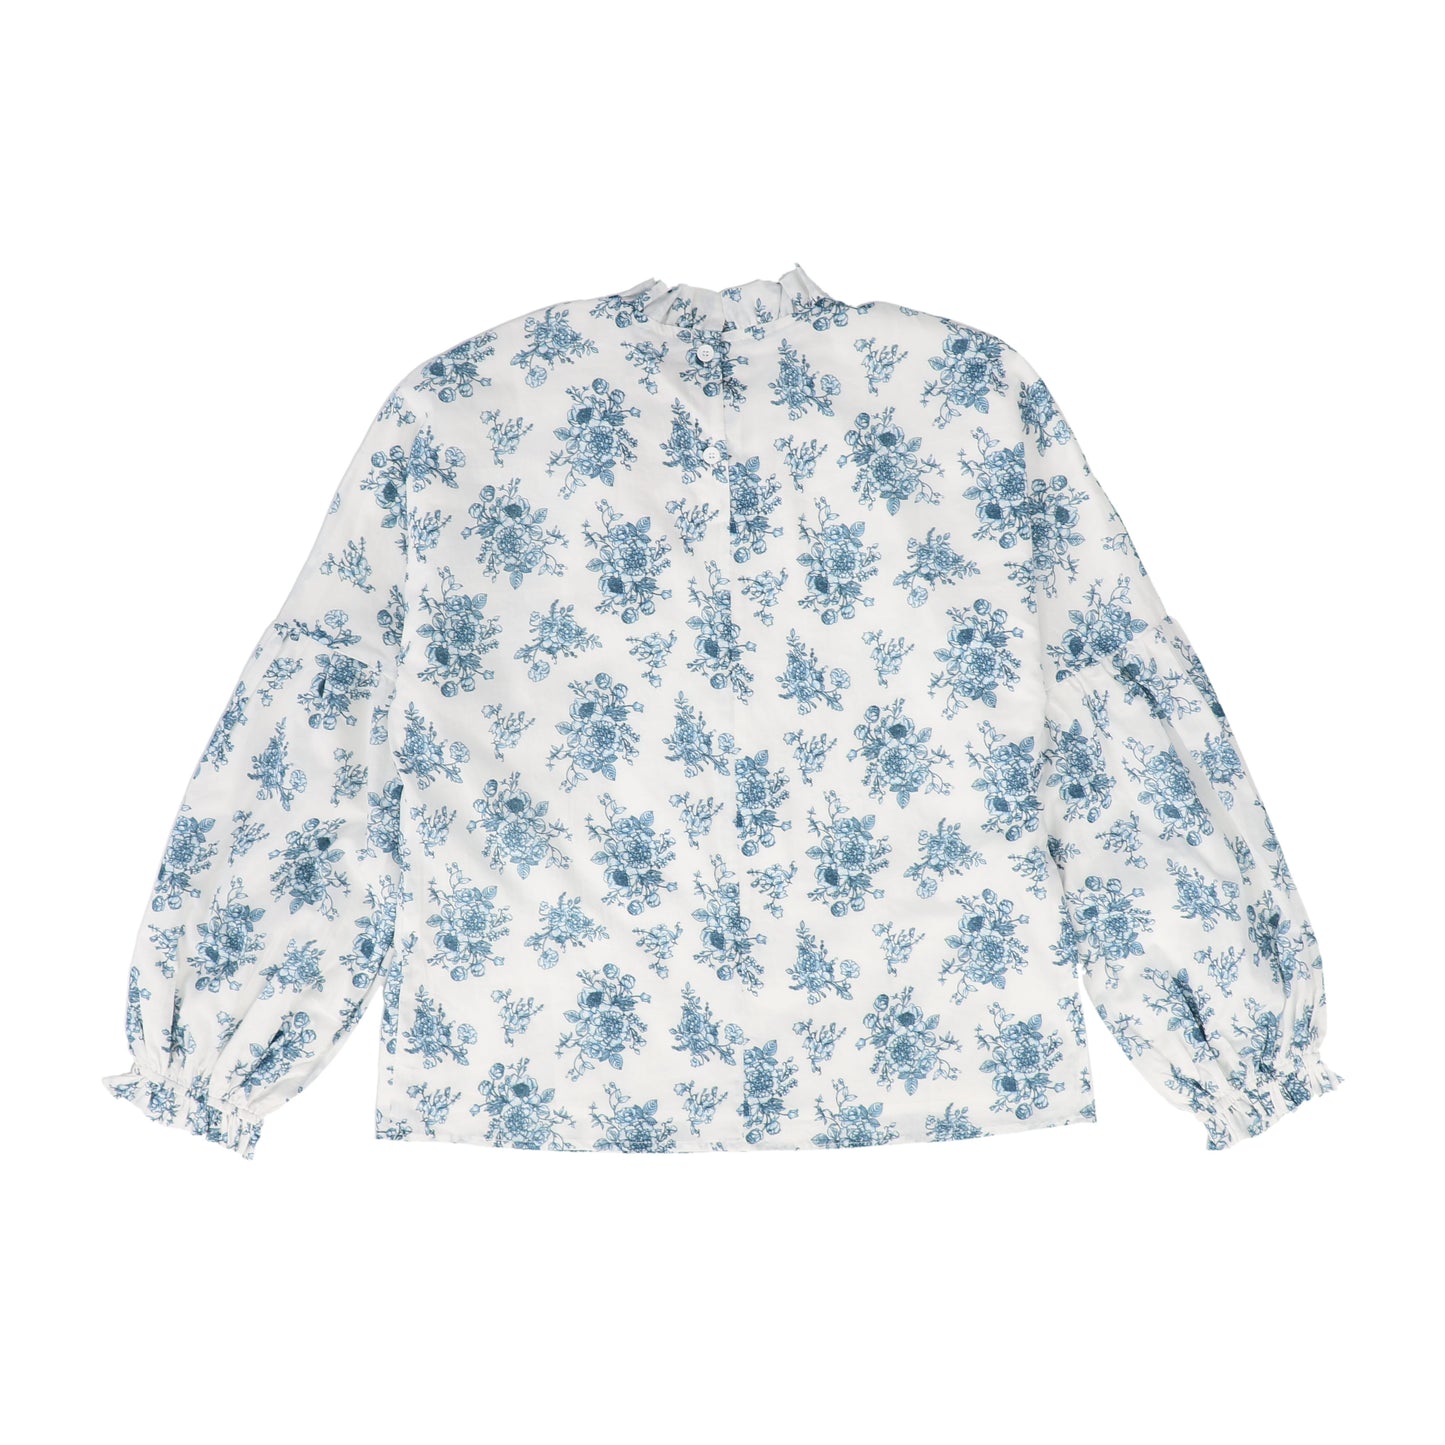 BAMBOO BLUE FLORAL BUNCHES PUFF SLEEVE TOP